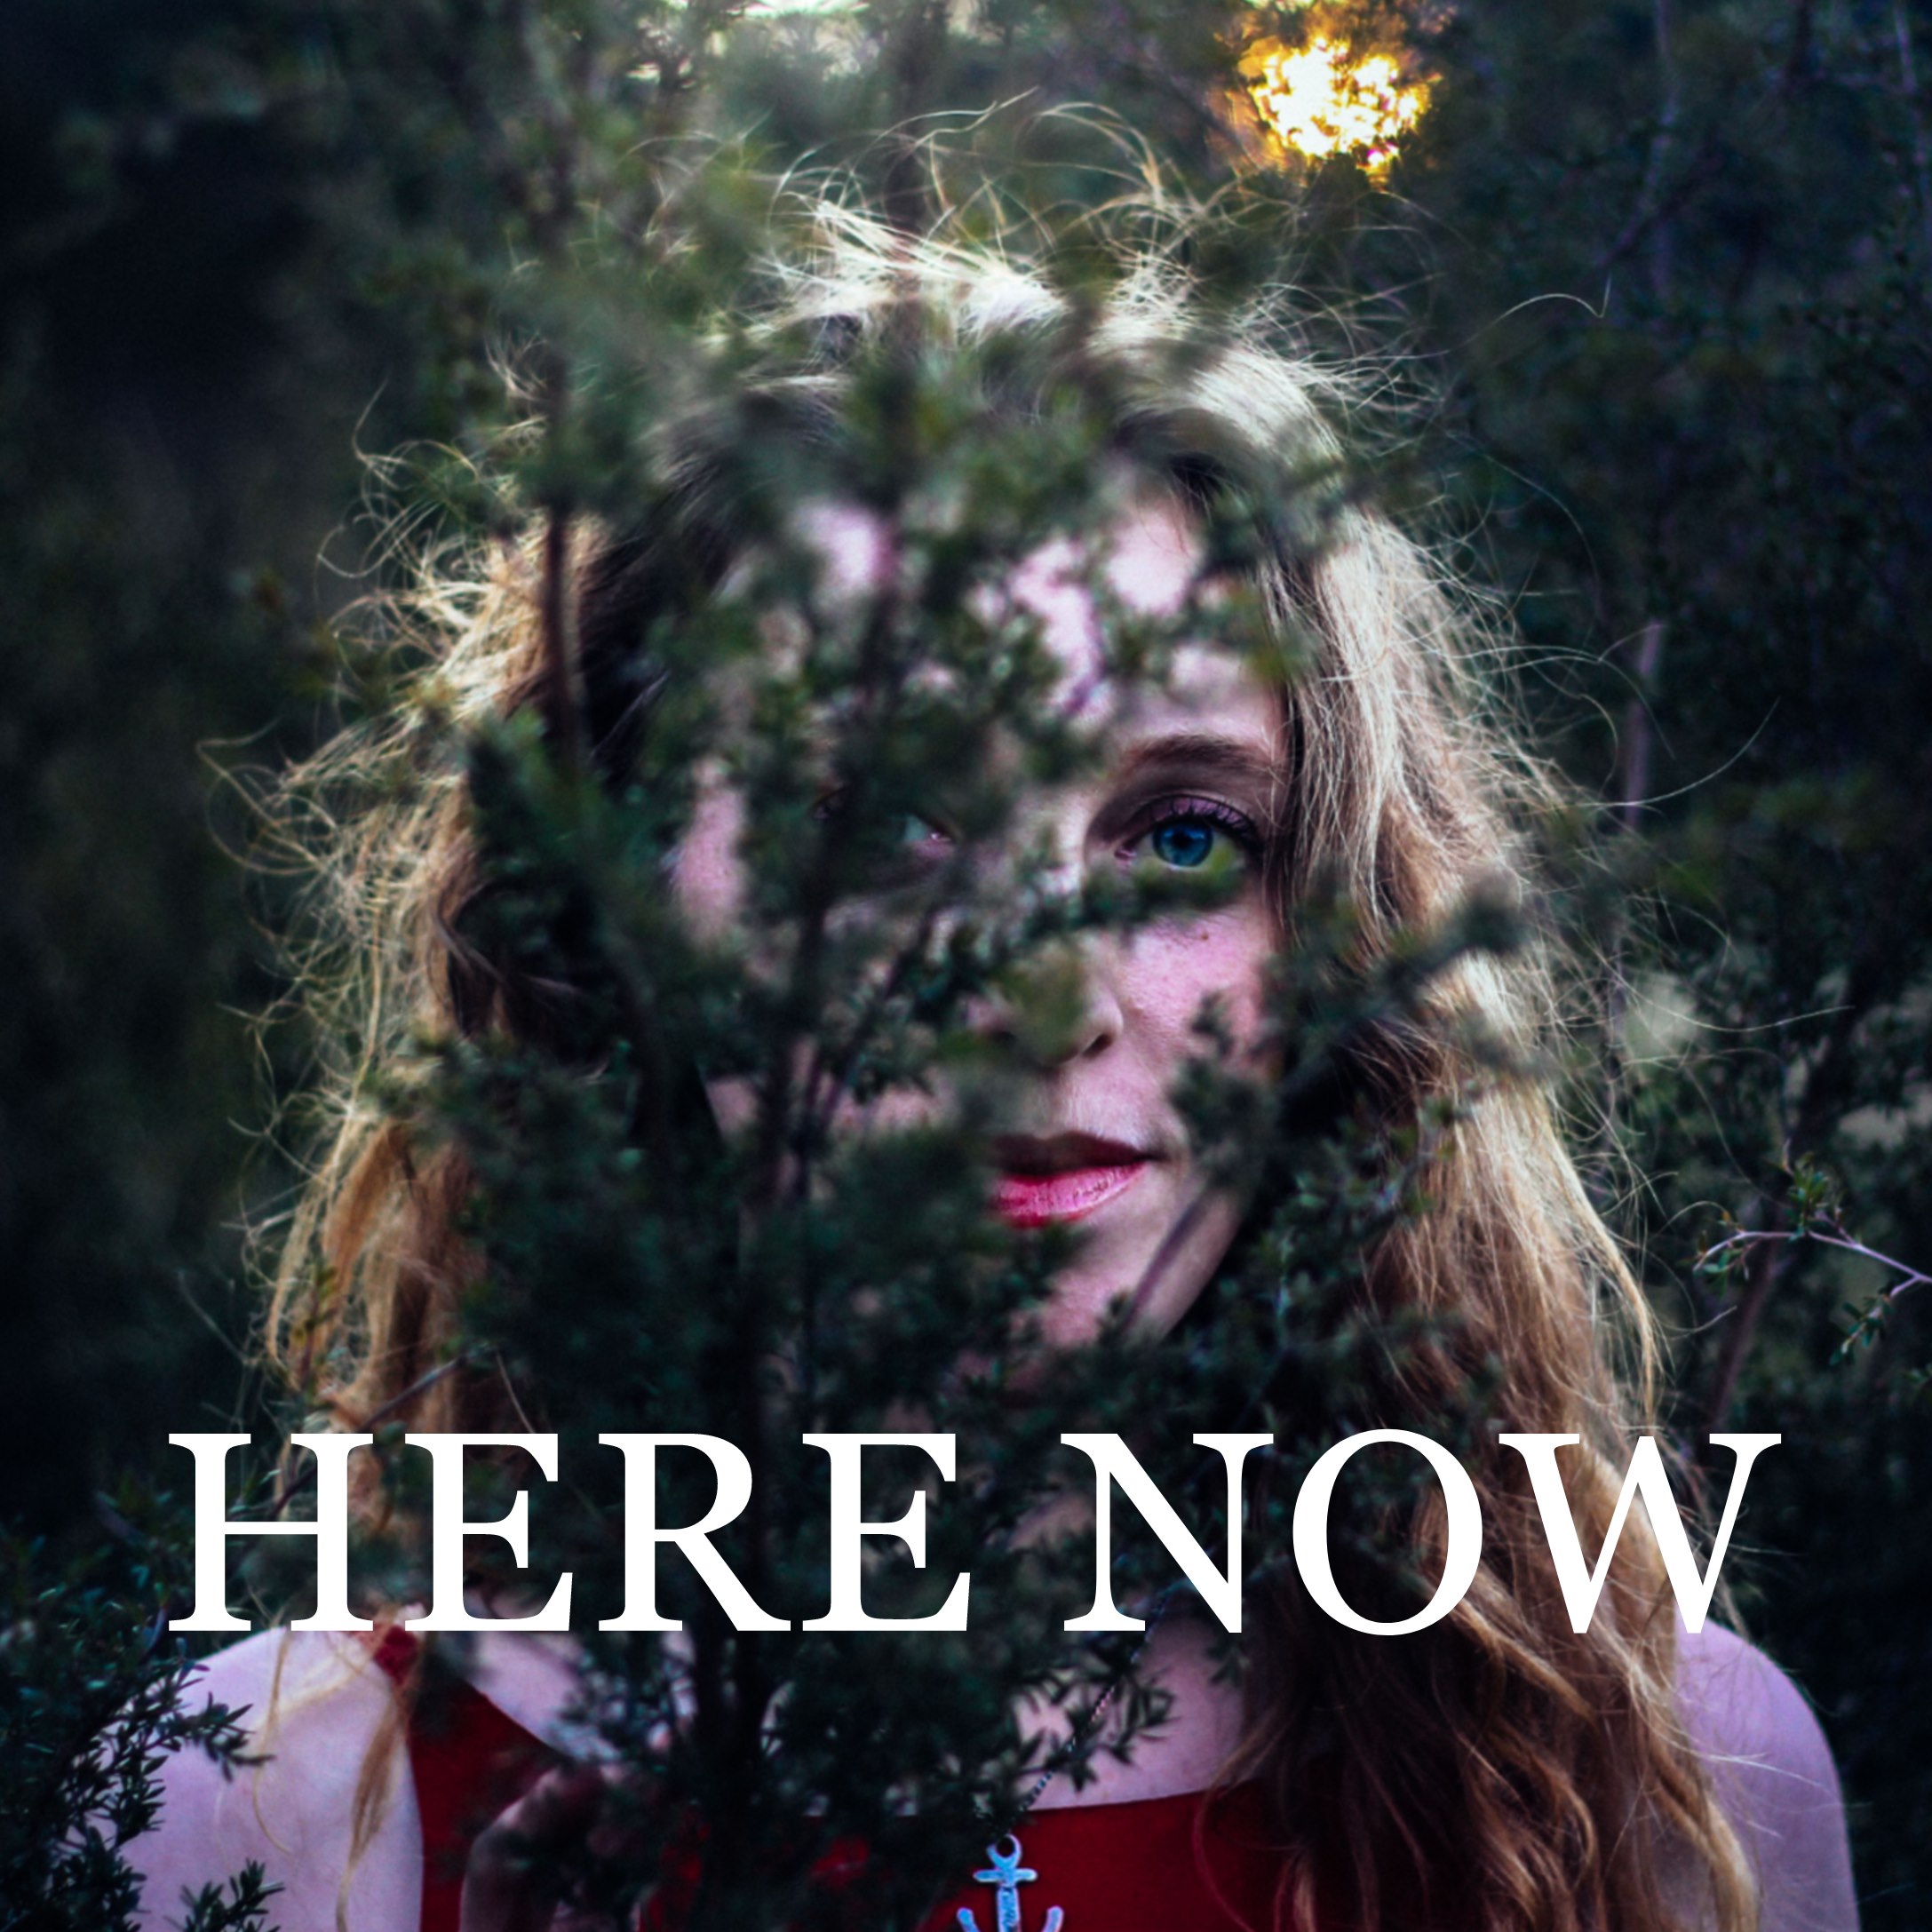 Album Review - Here Now - blog post image